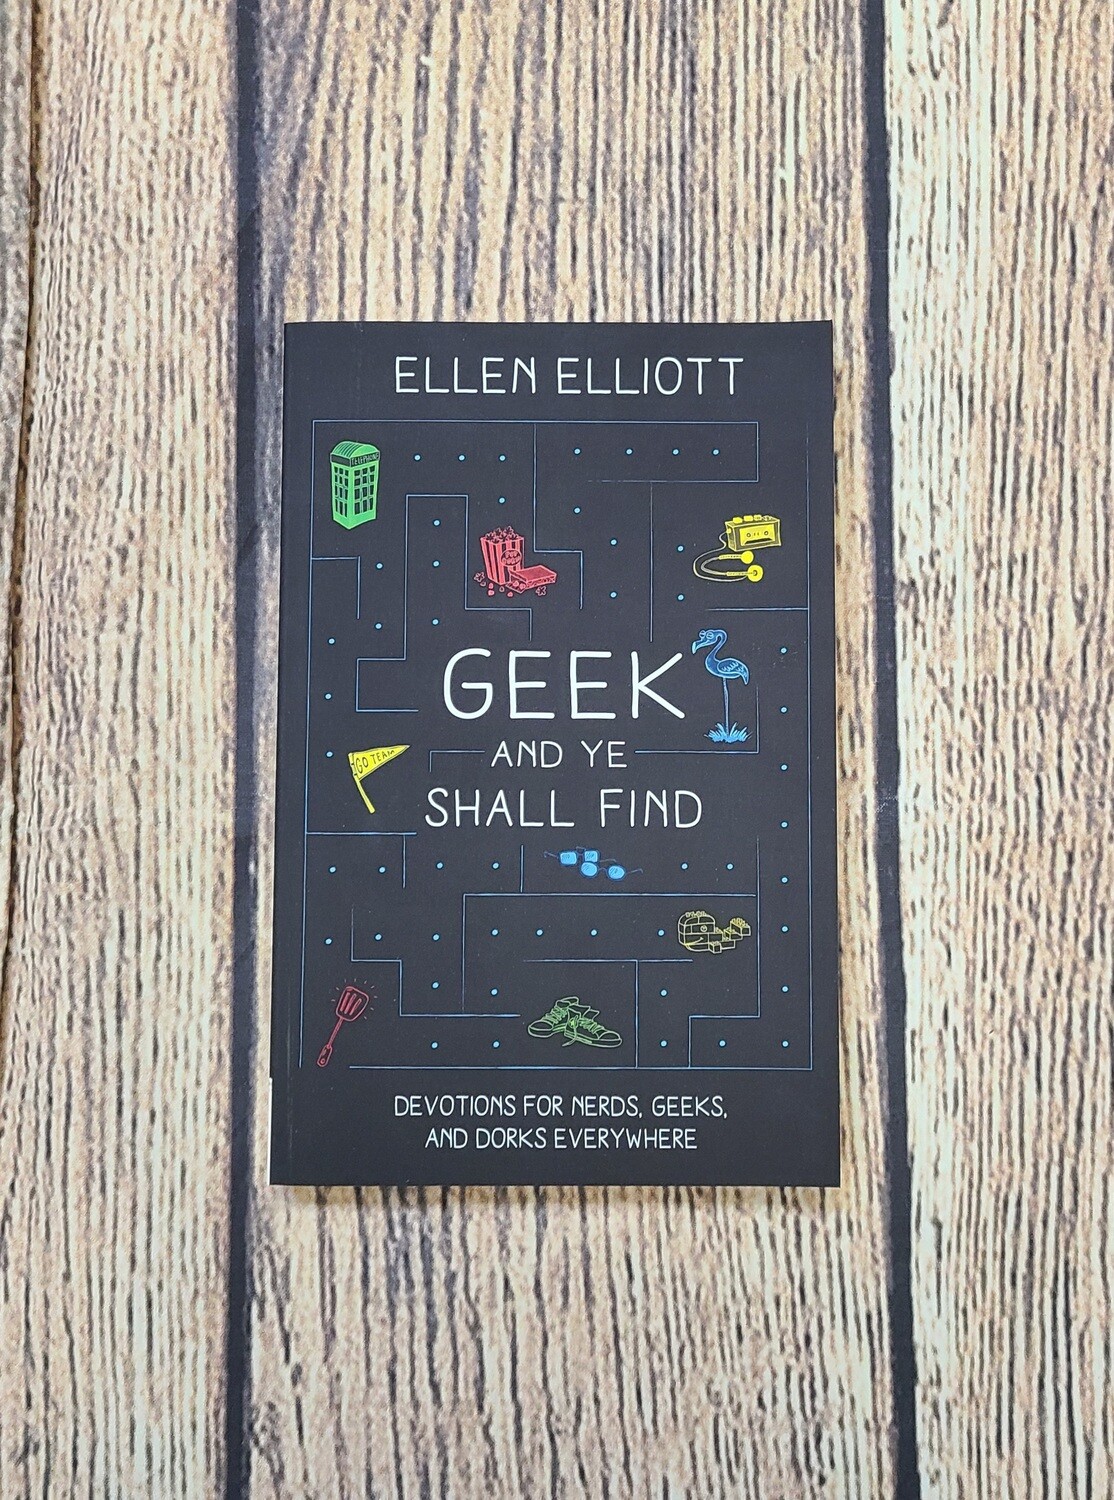 Geek and Ye Shall Find: Devotions for Nerds, Geeks, and Dorks Everywhere by Ellen Elliott